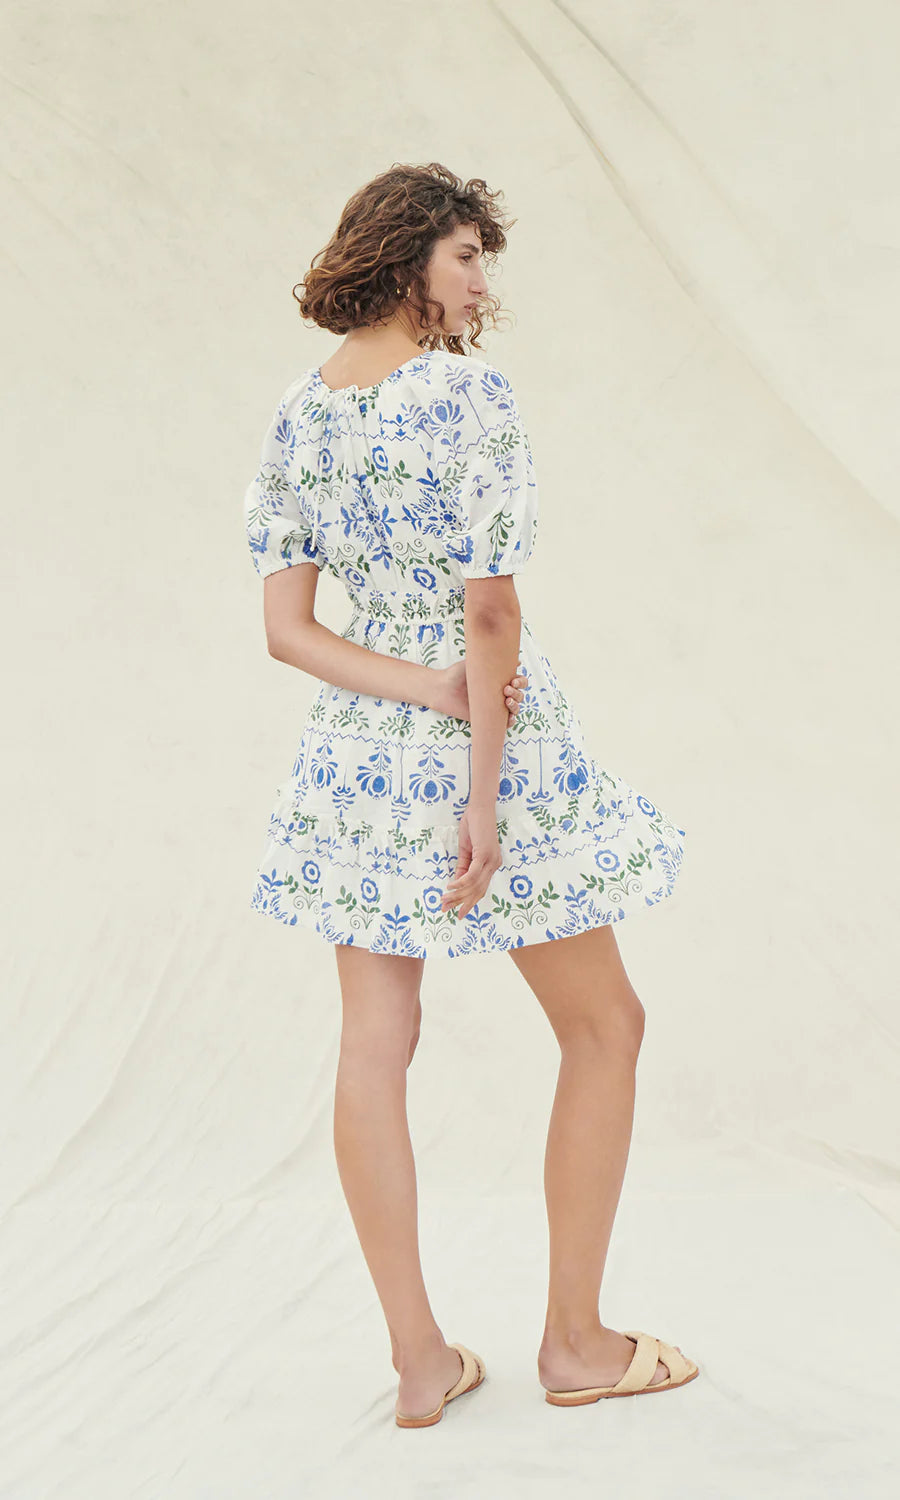 Gracey Floral Mini Dress by Saylor at waterlilyshop.com